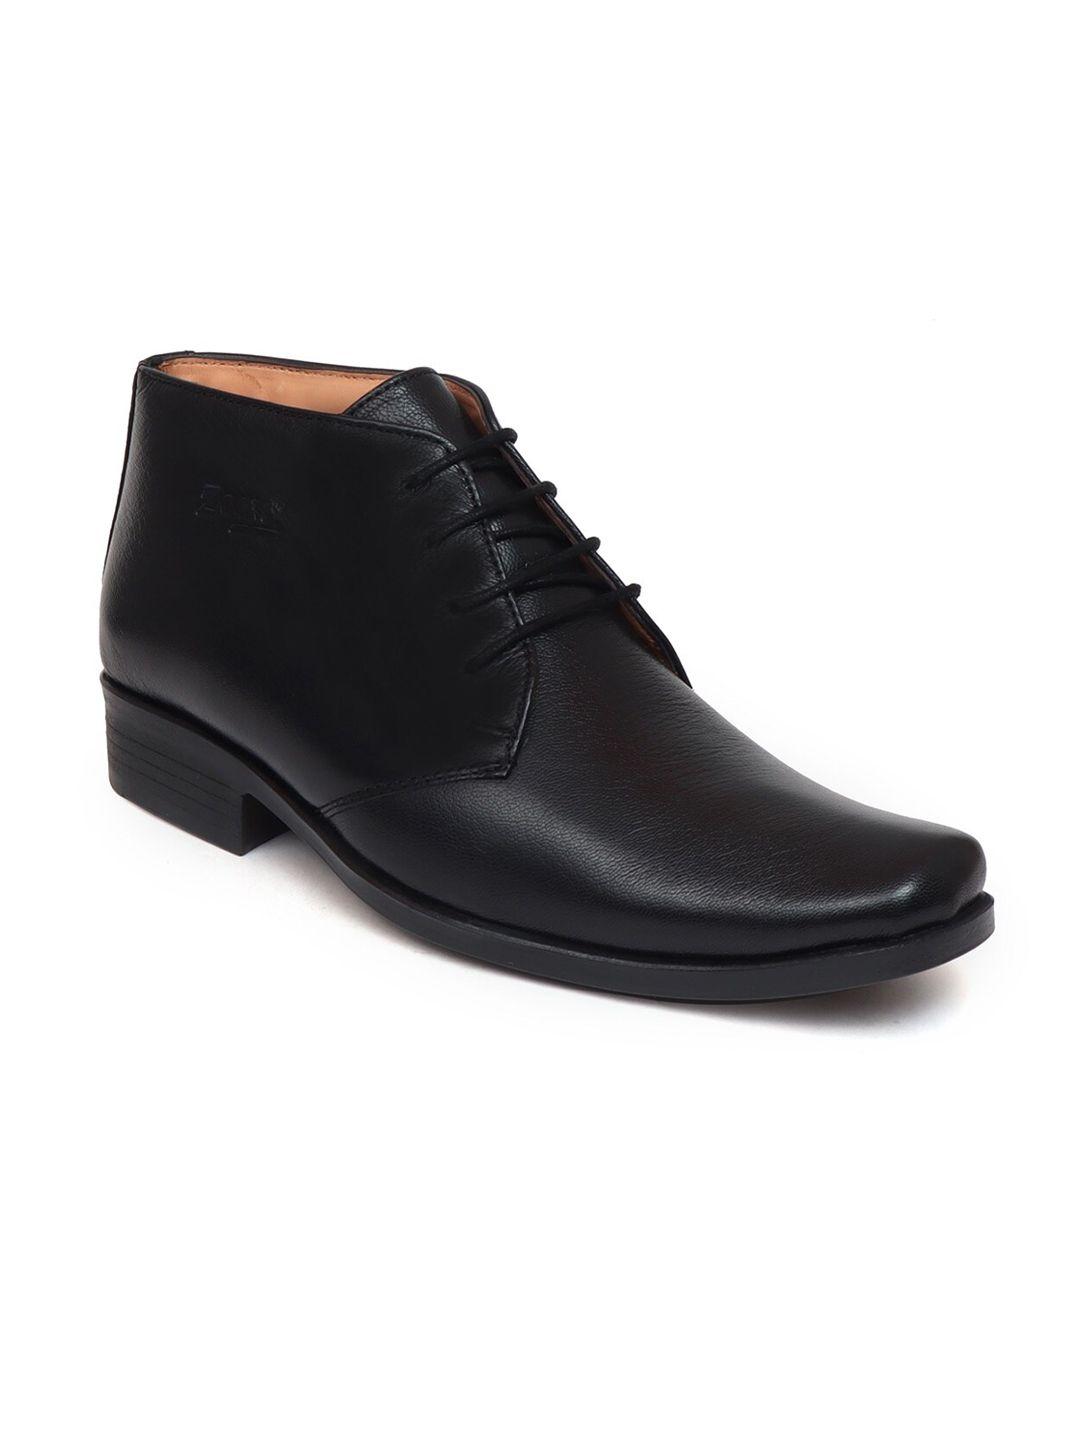 zoom shoes men textured leather regular boots